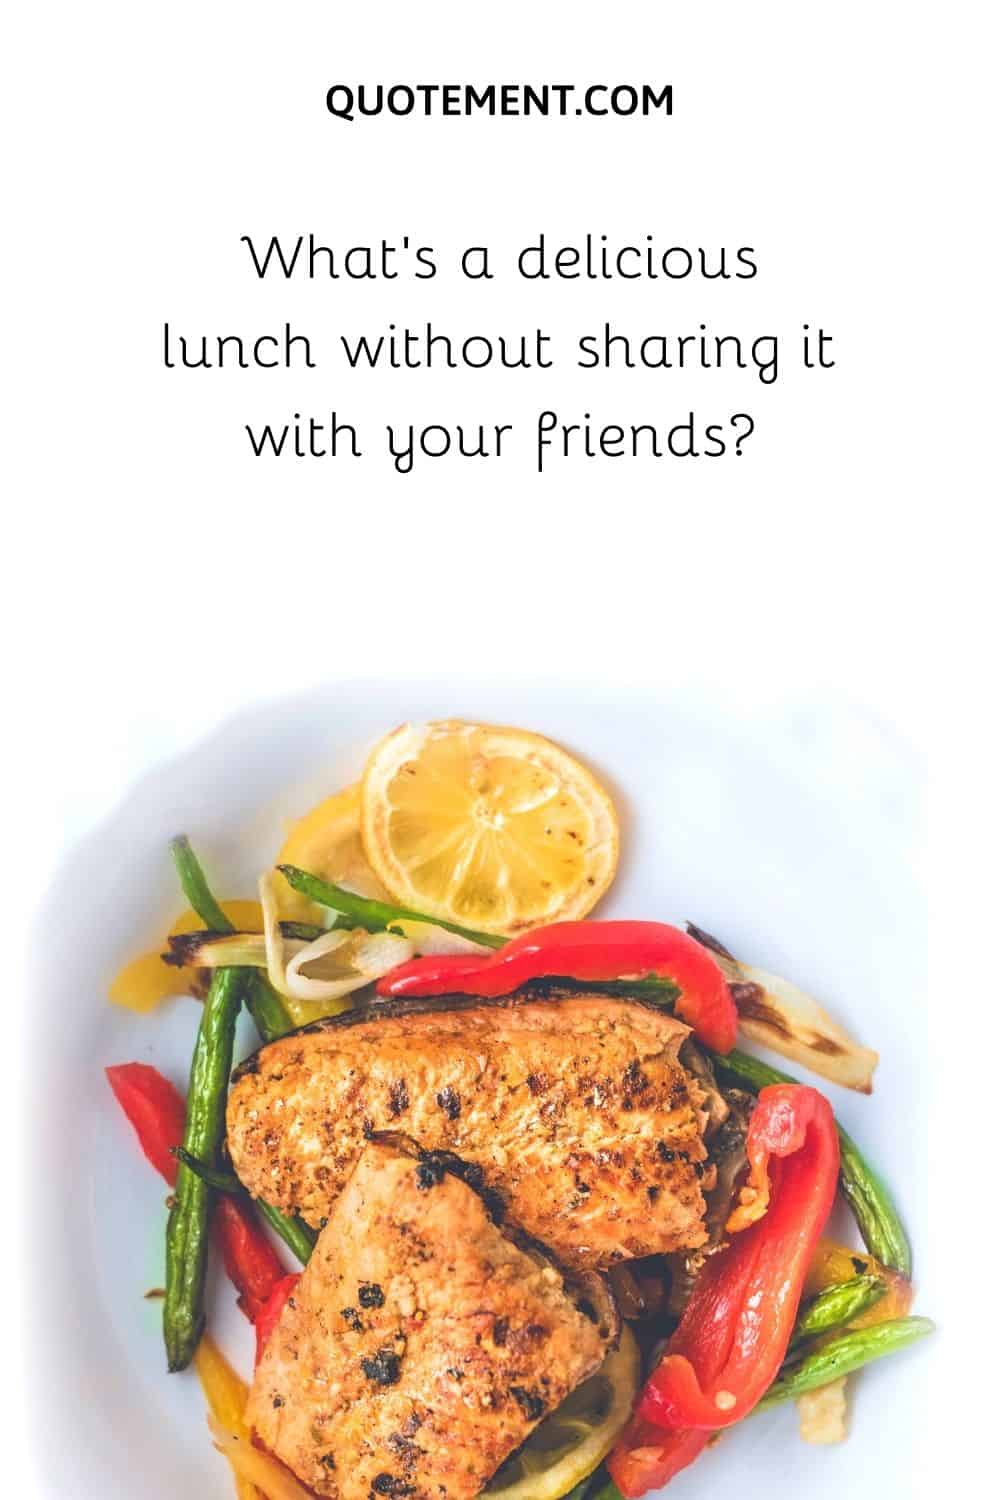 What’s a delicious lunch without sharing it with your friends